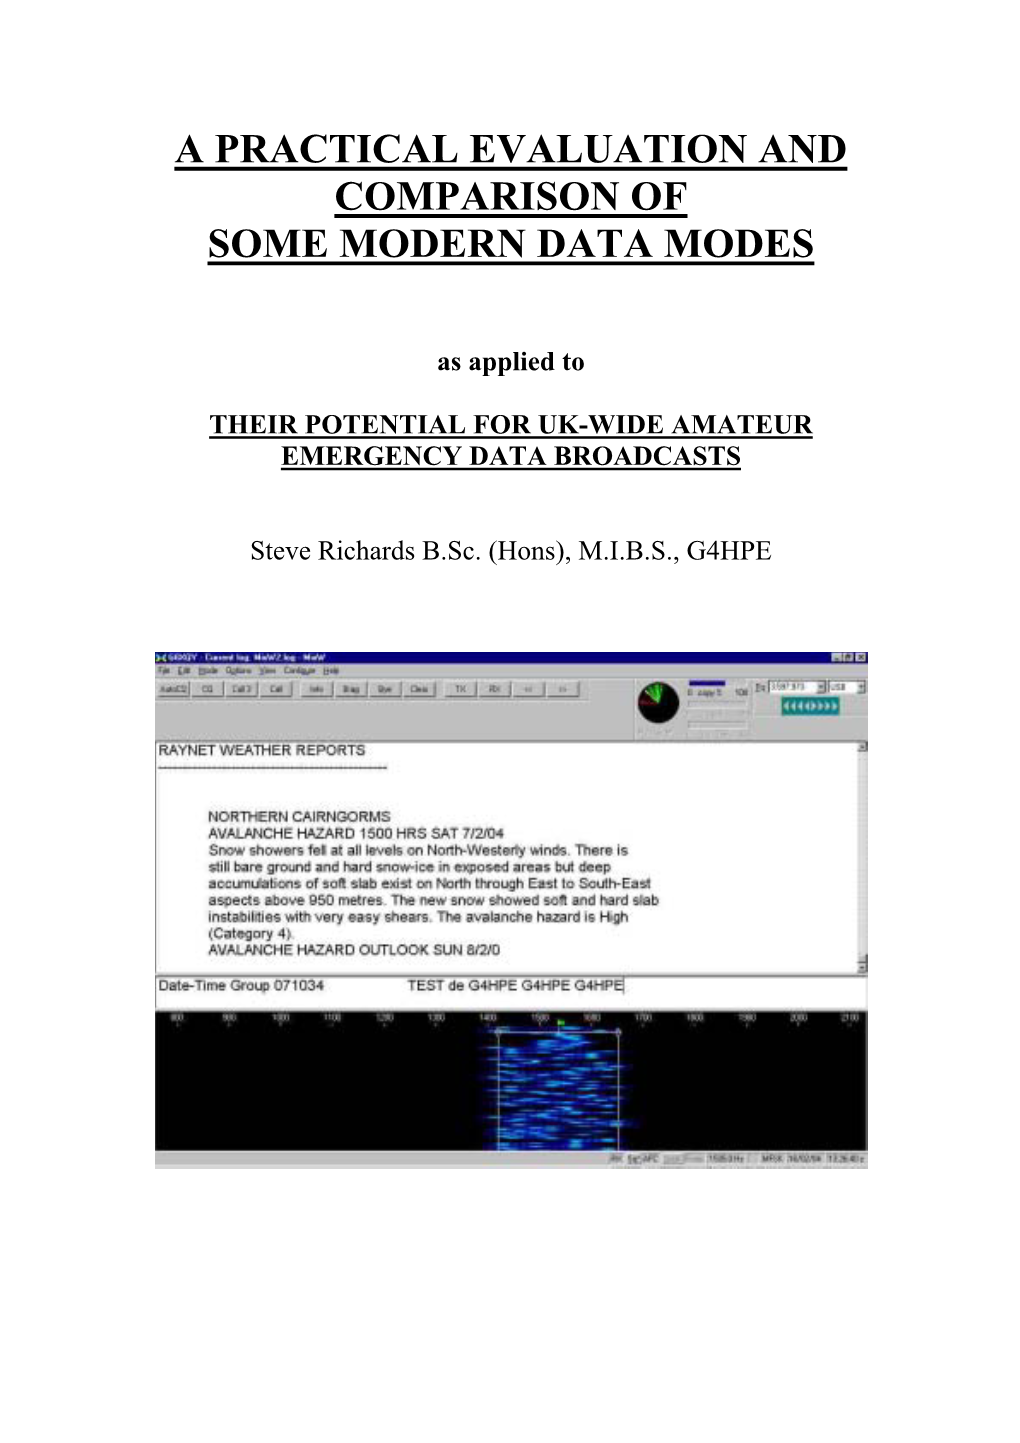 A Practical Evaluation and Comparison of Some Modern Data Modes